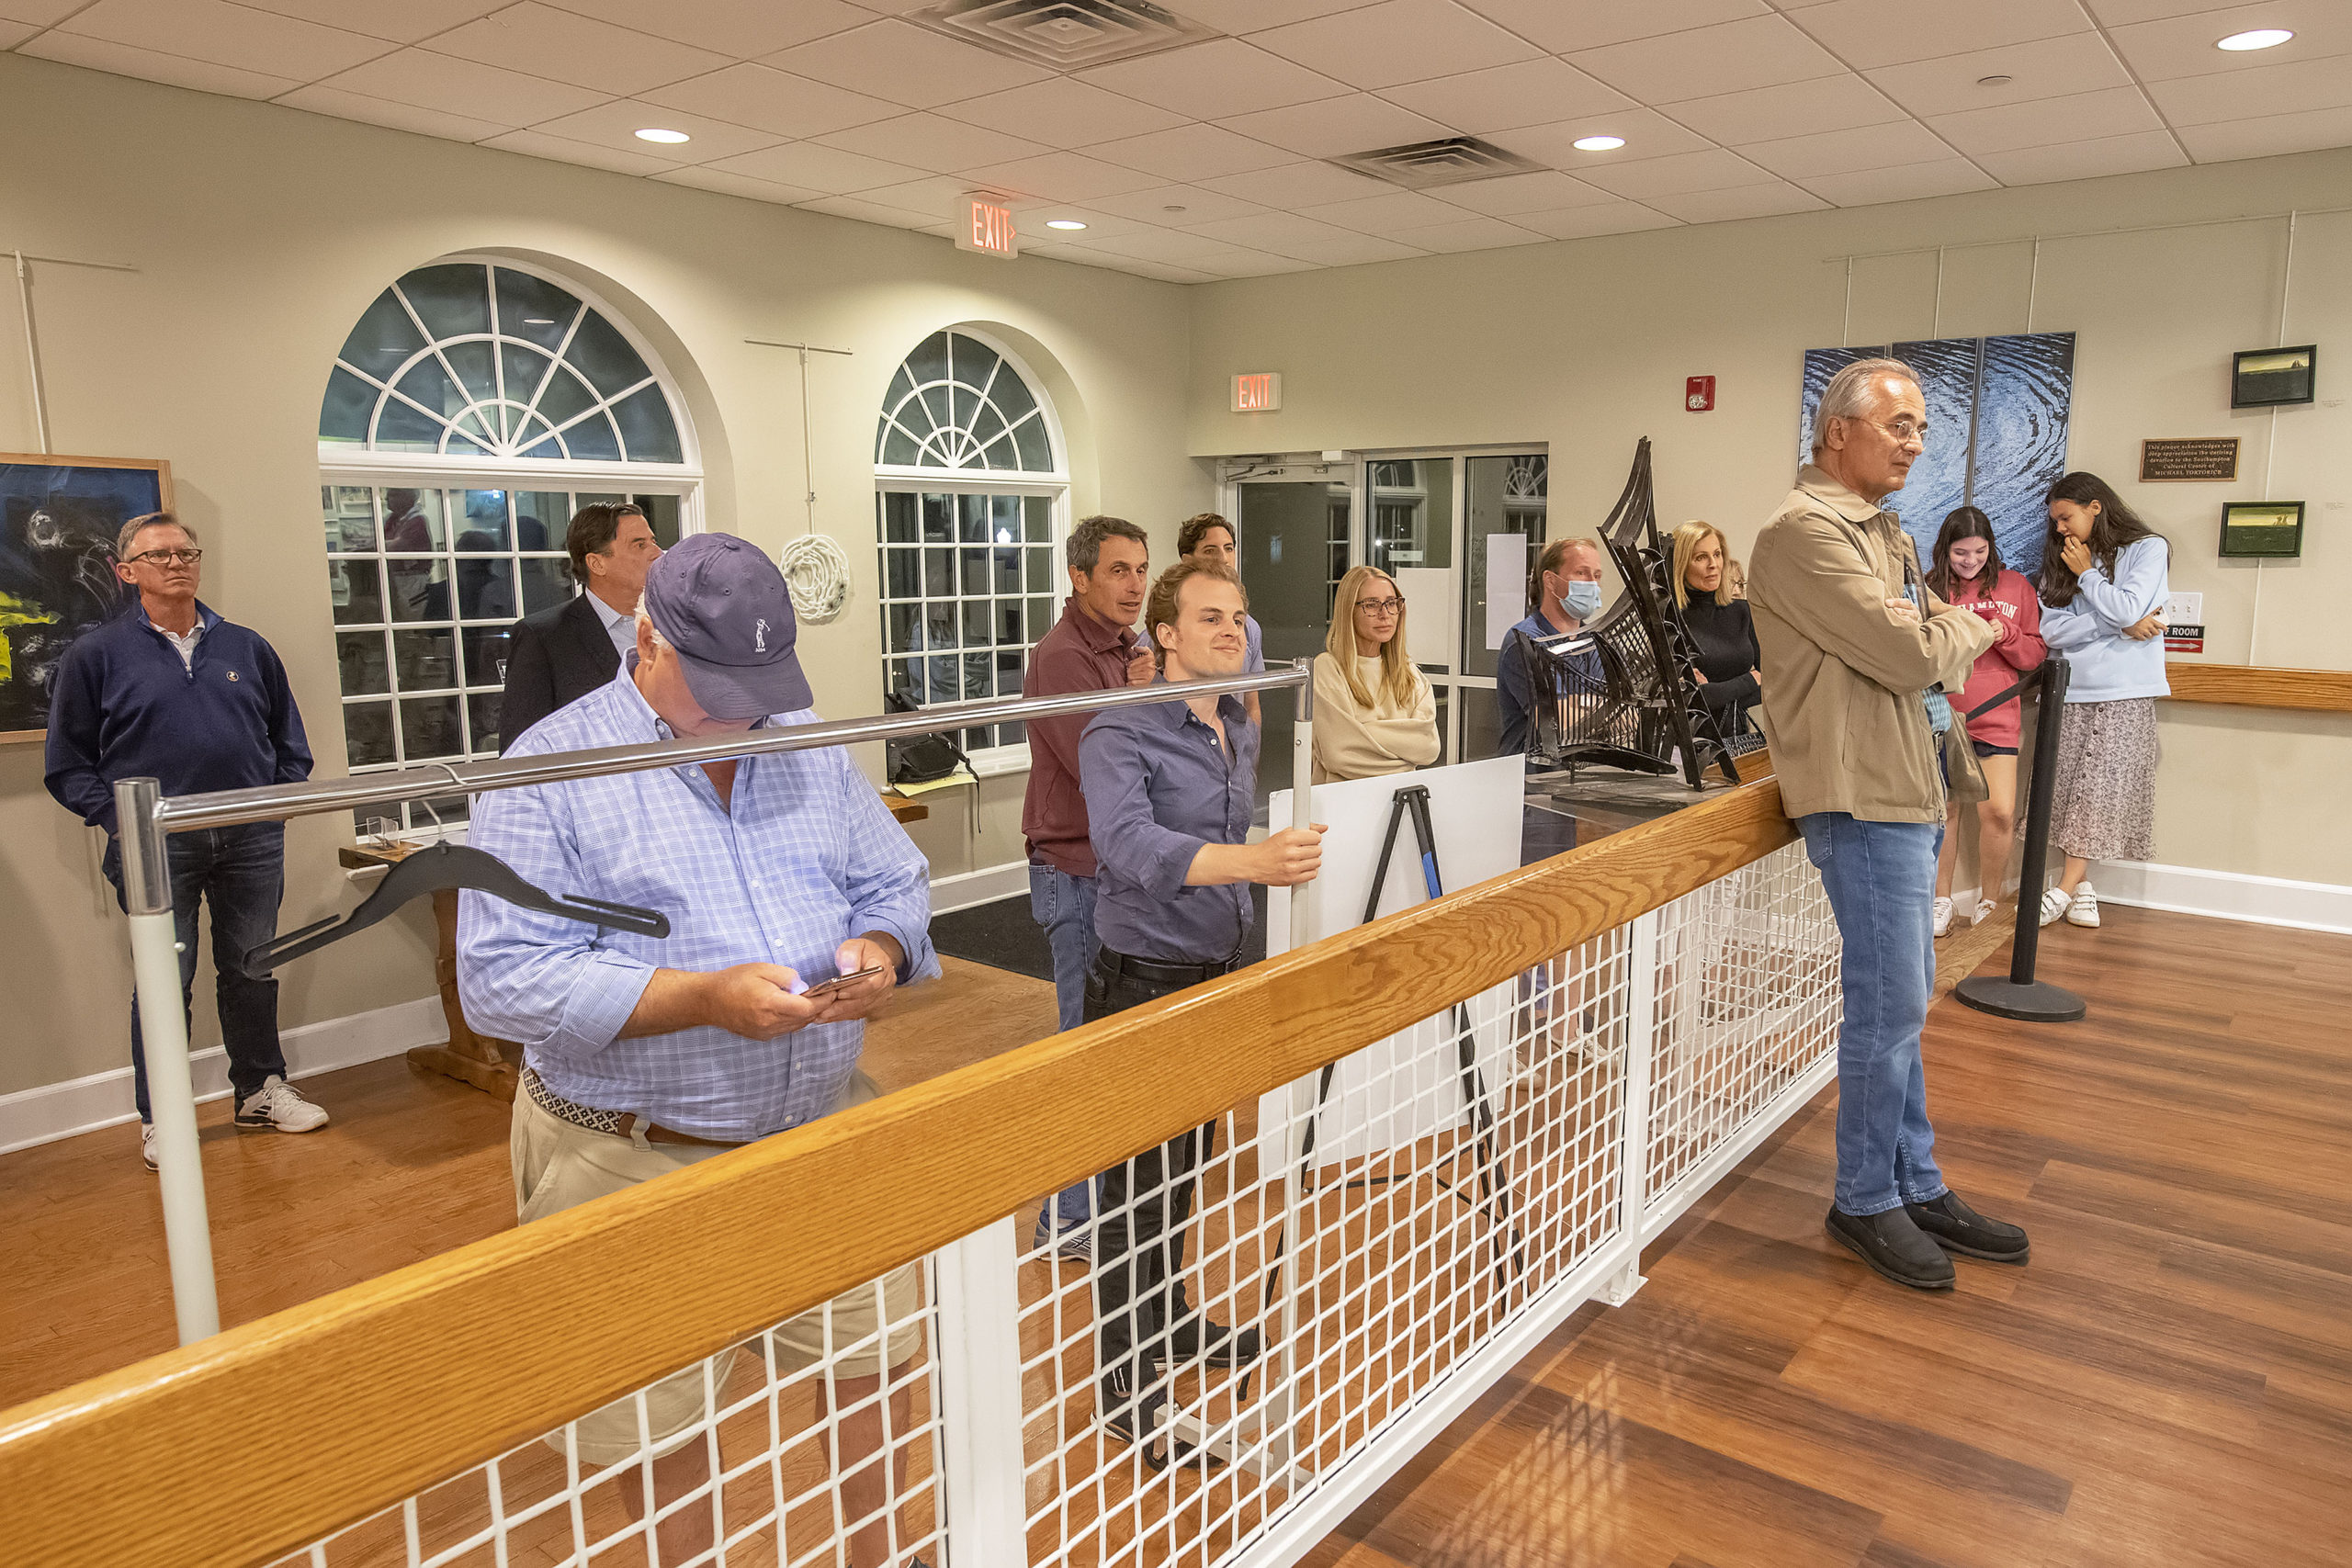 A gallery of interested persons watches from outside the main room as the vote count from each of the voting machines is tabulated during the 2021 Southampton Village Mayoral election at the Southampton Cultural Center on Friday night. MICHAEL HELLER